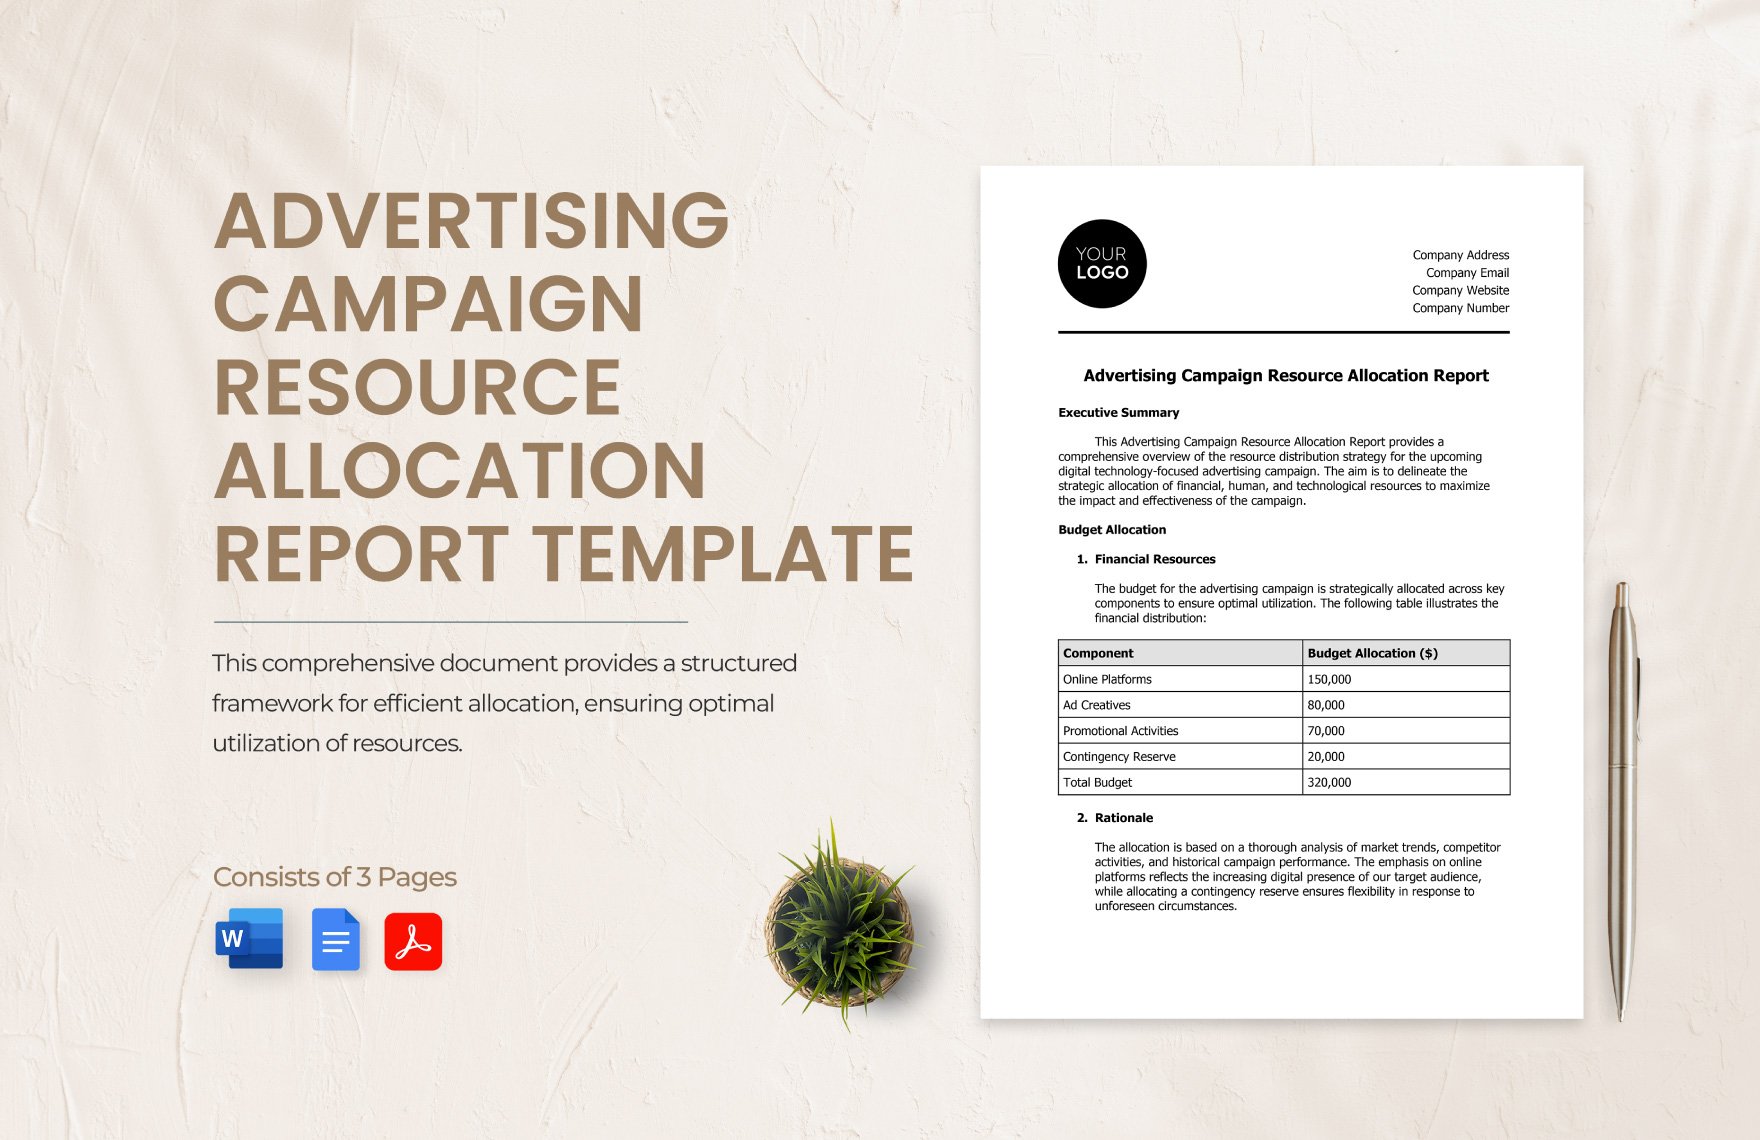 Advertising Campaign Resource Allocation Report Template in Word, Google Docs, PDF